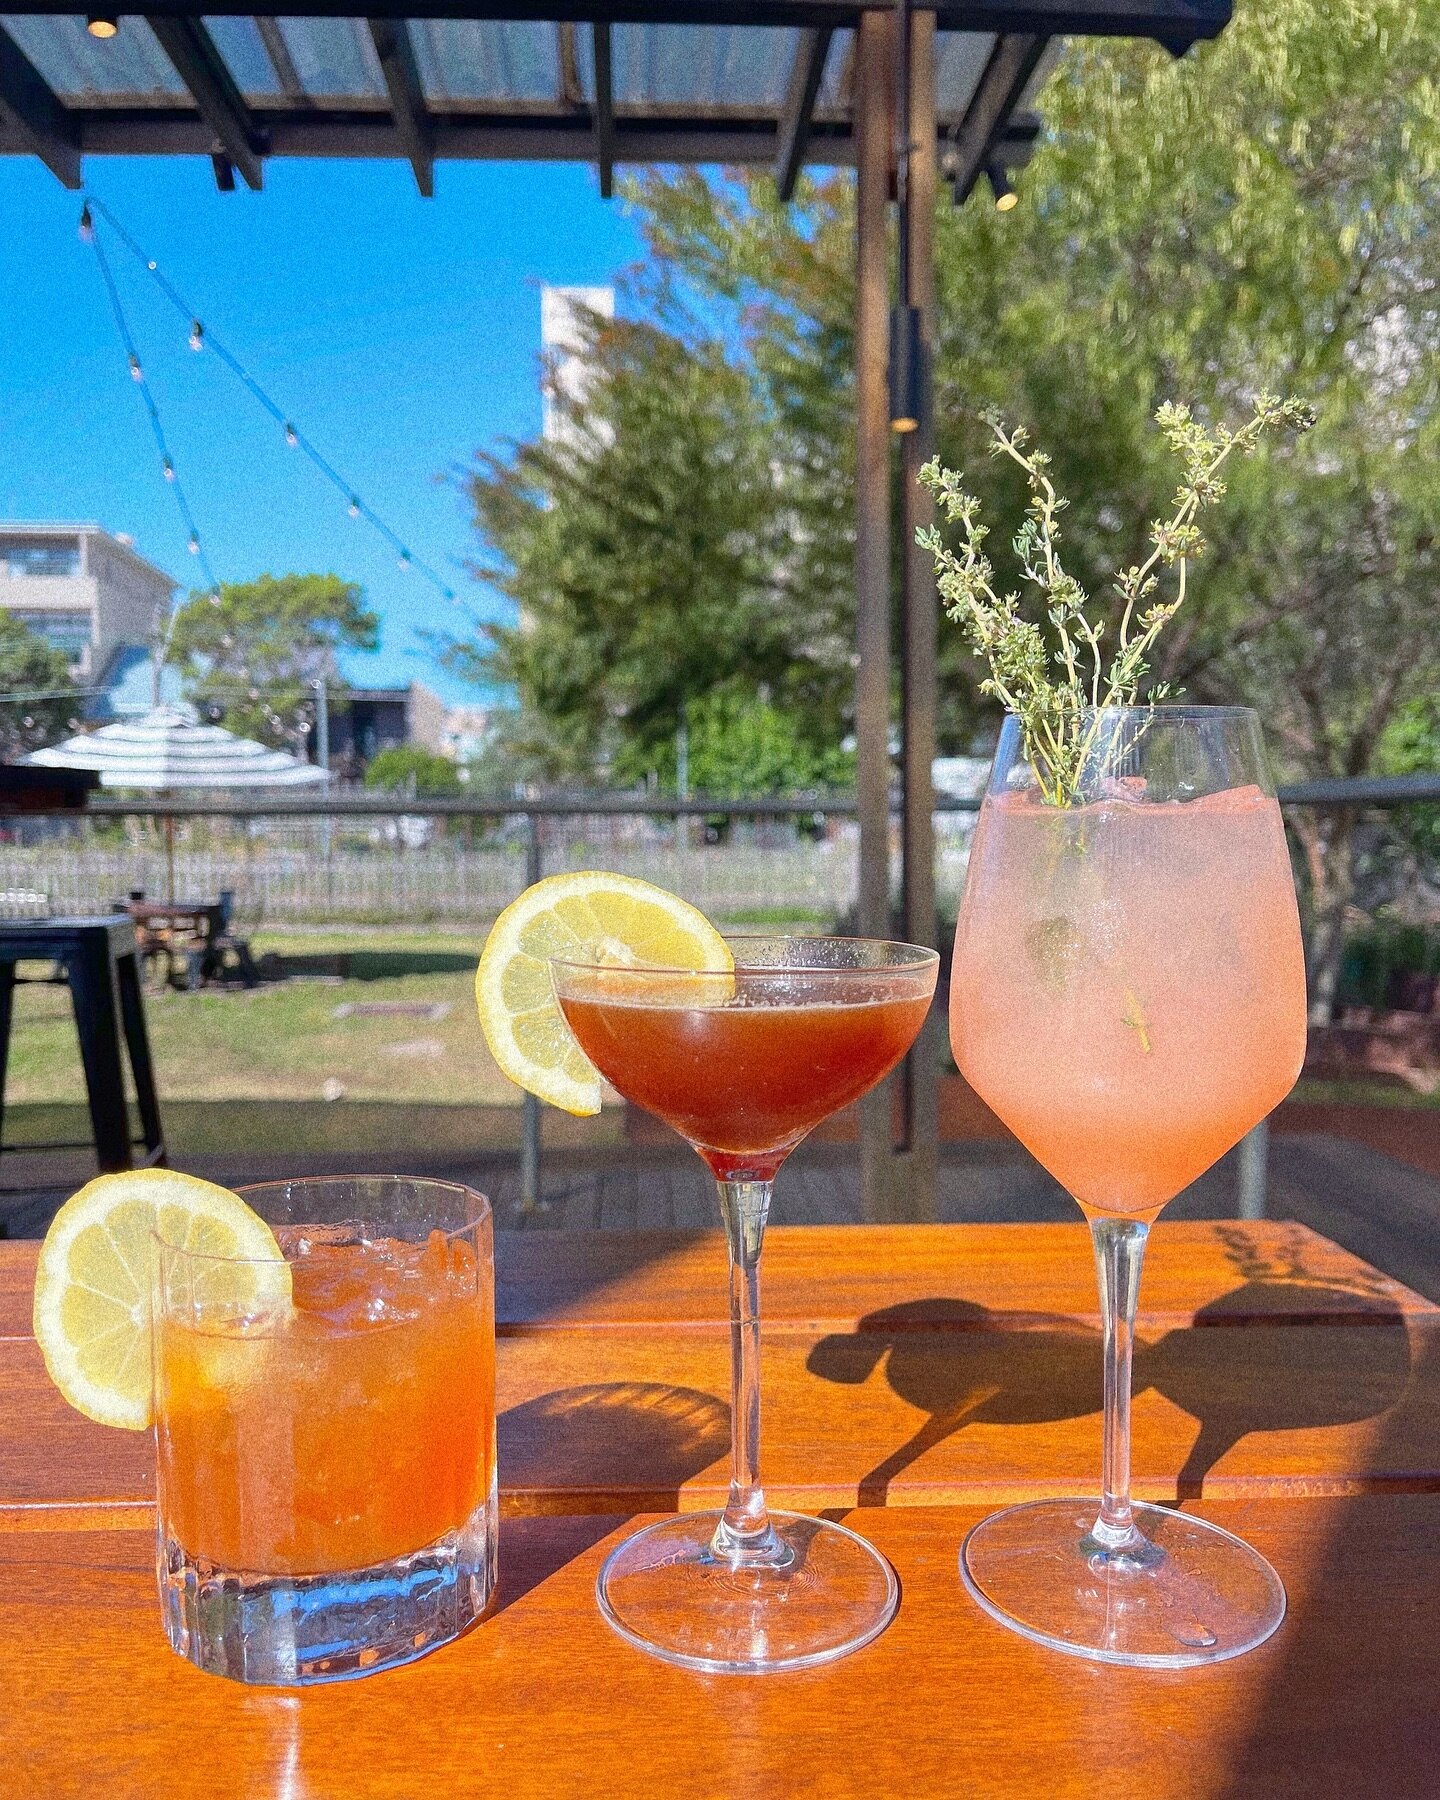 Celebrate the weekend! ✨ 
TGIF Happy Hours with $13 cocktails 🍹💯
Everyday Friday 4-6PM 

Featuring our Specials 
Monte&rsquo;s Mark | Bella Cazabel | Ruby Thyme Spritz

#getyourdrinkon #camperdown #innerwest